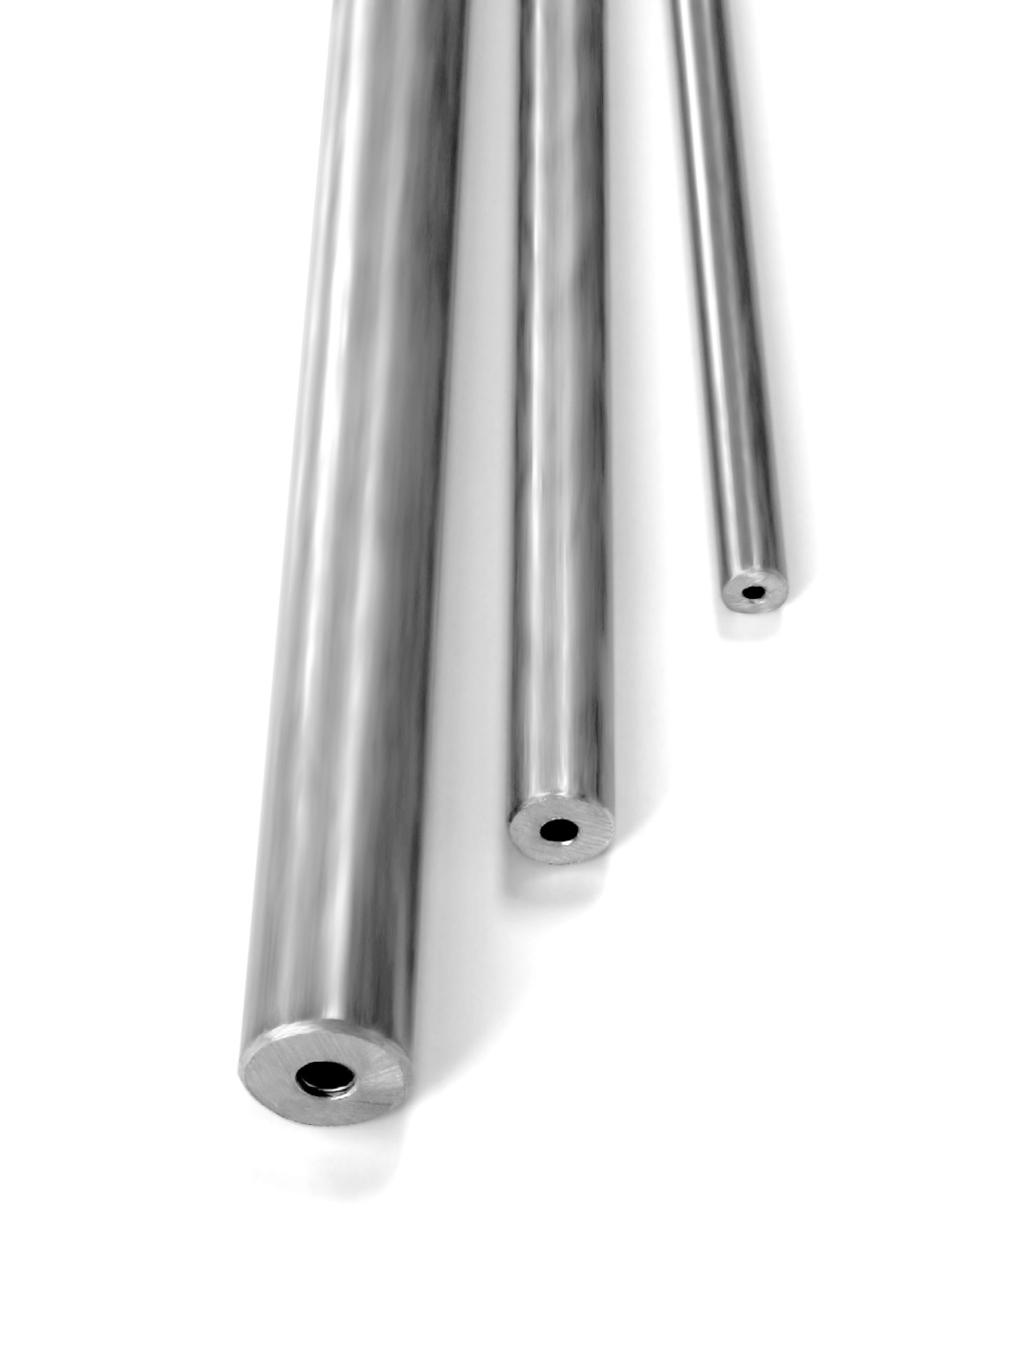 igh Pressure Tubing MXPRO offers a line of cold drawn thick wall tubing, with flow areas to compliment the high pressure valves and fittings.